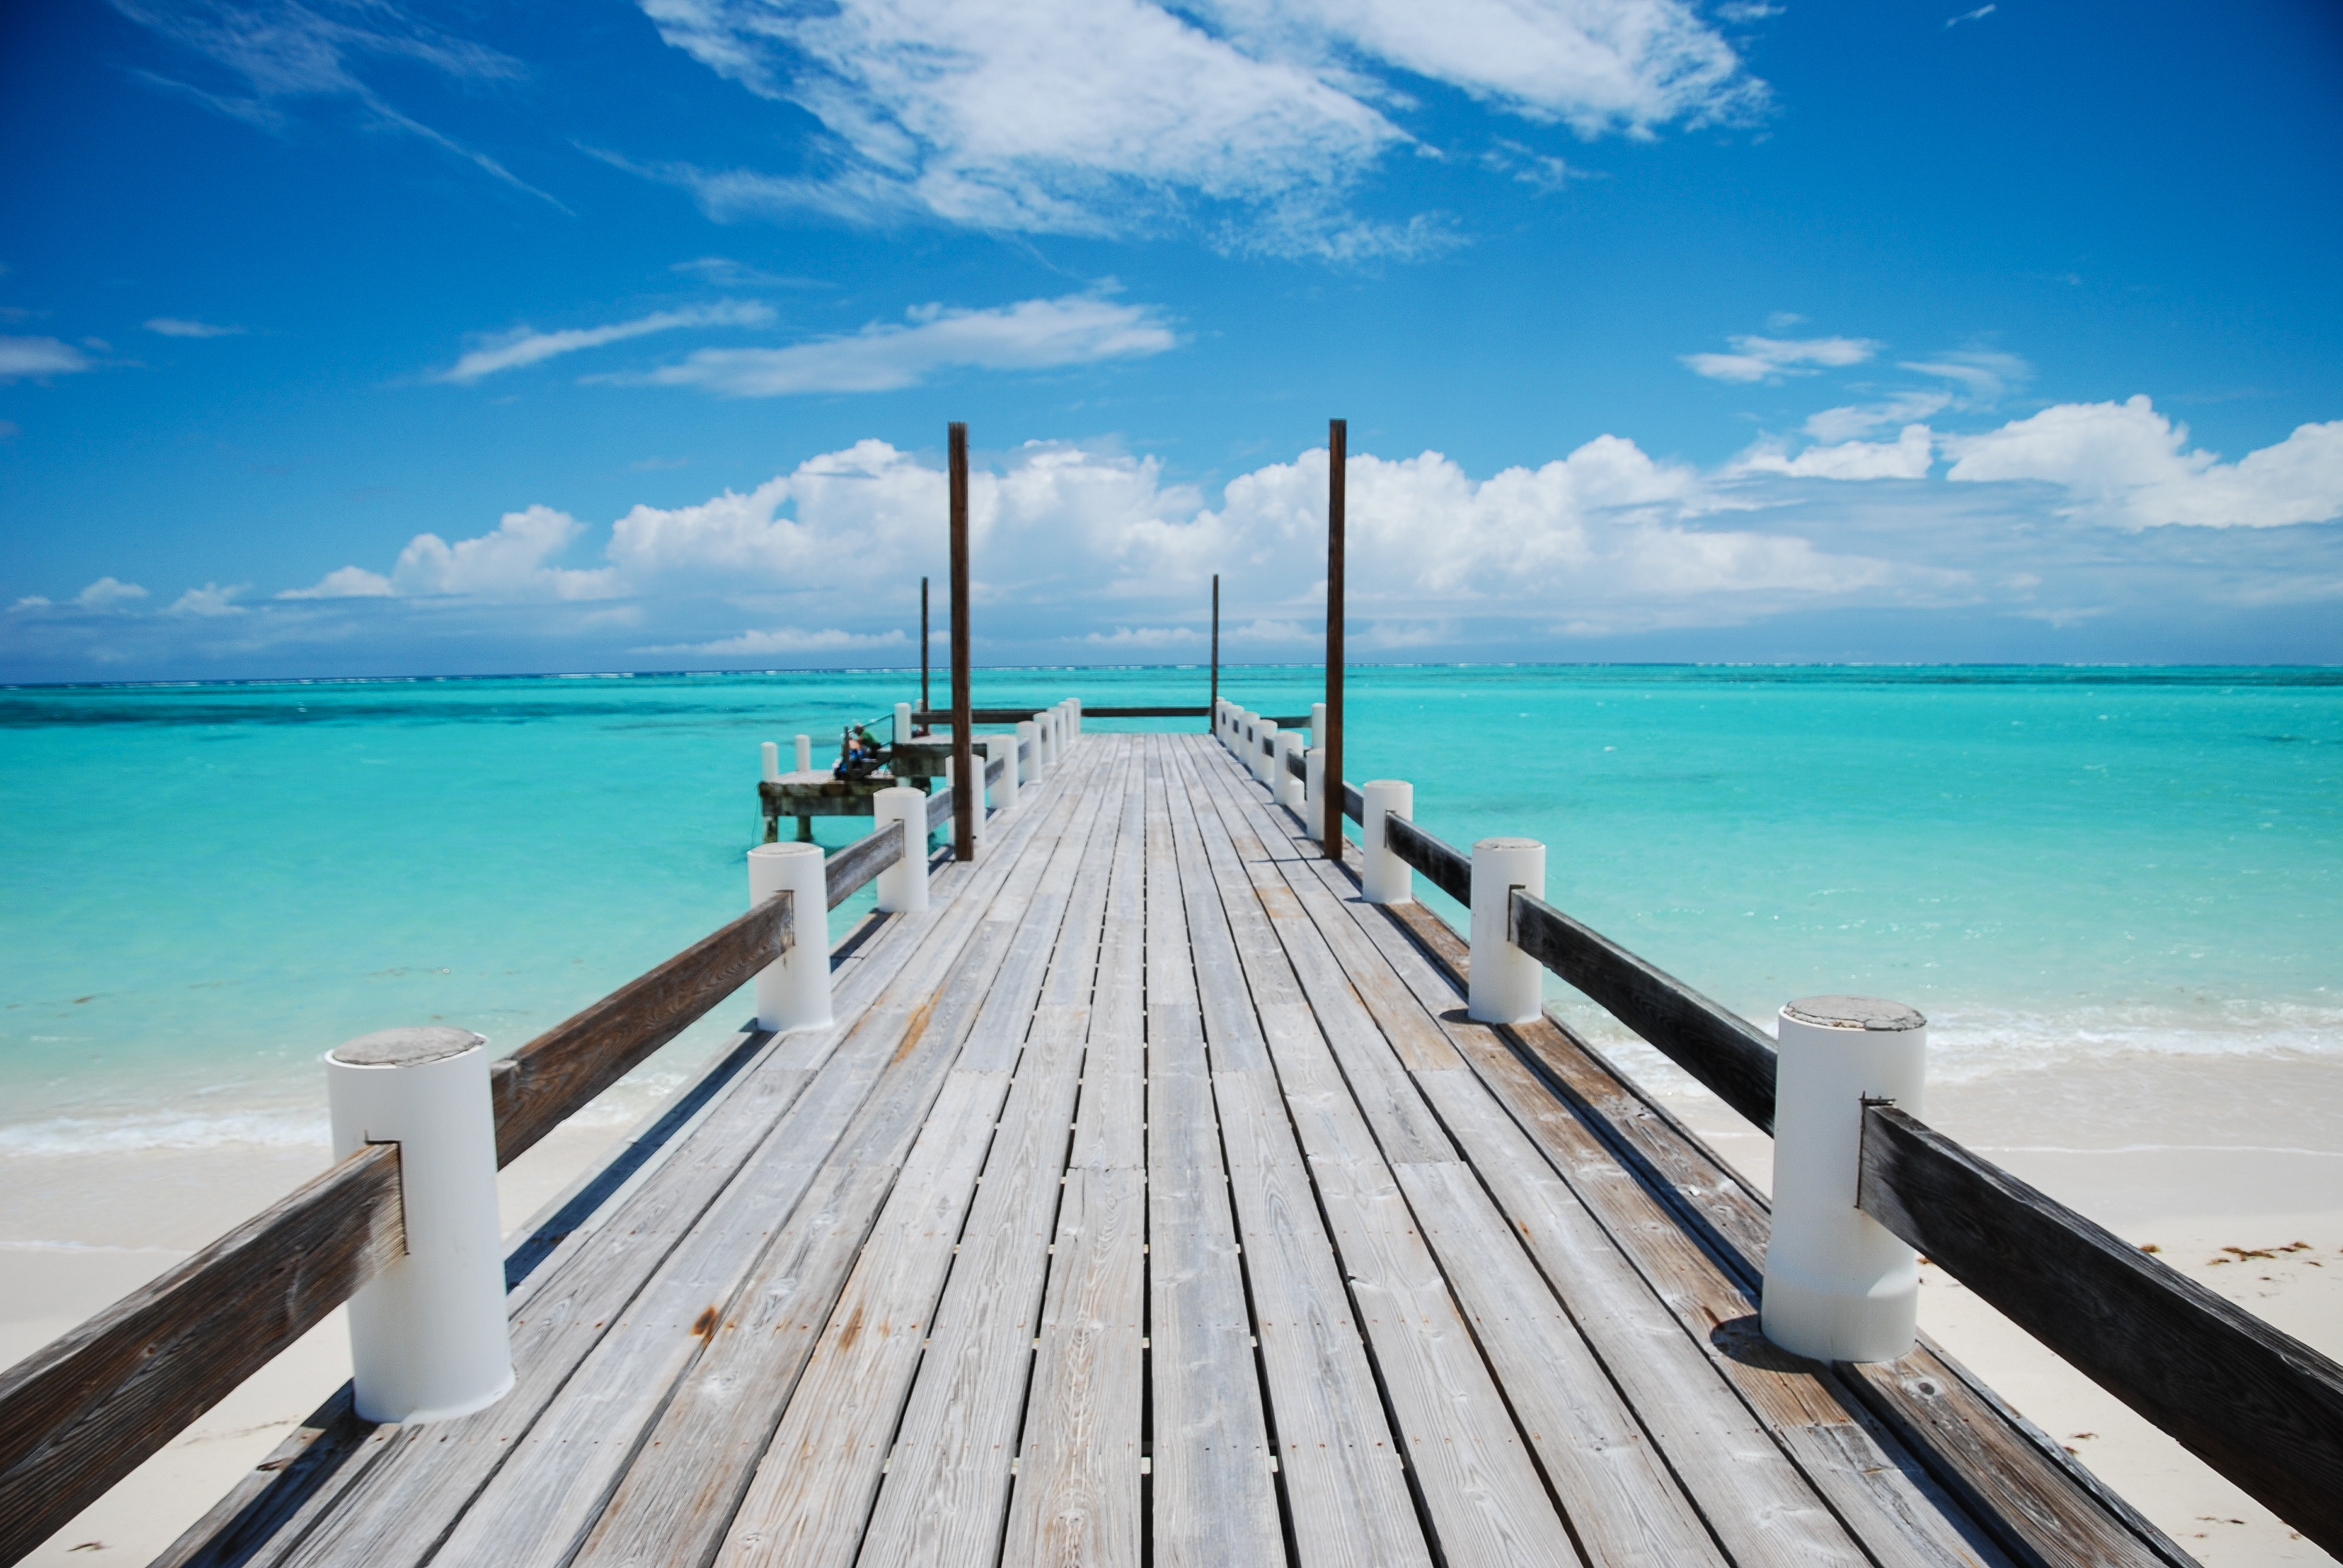 Flights to Turks & Caicos in the $200s & $300s round-trip!